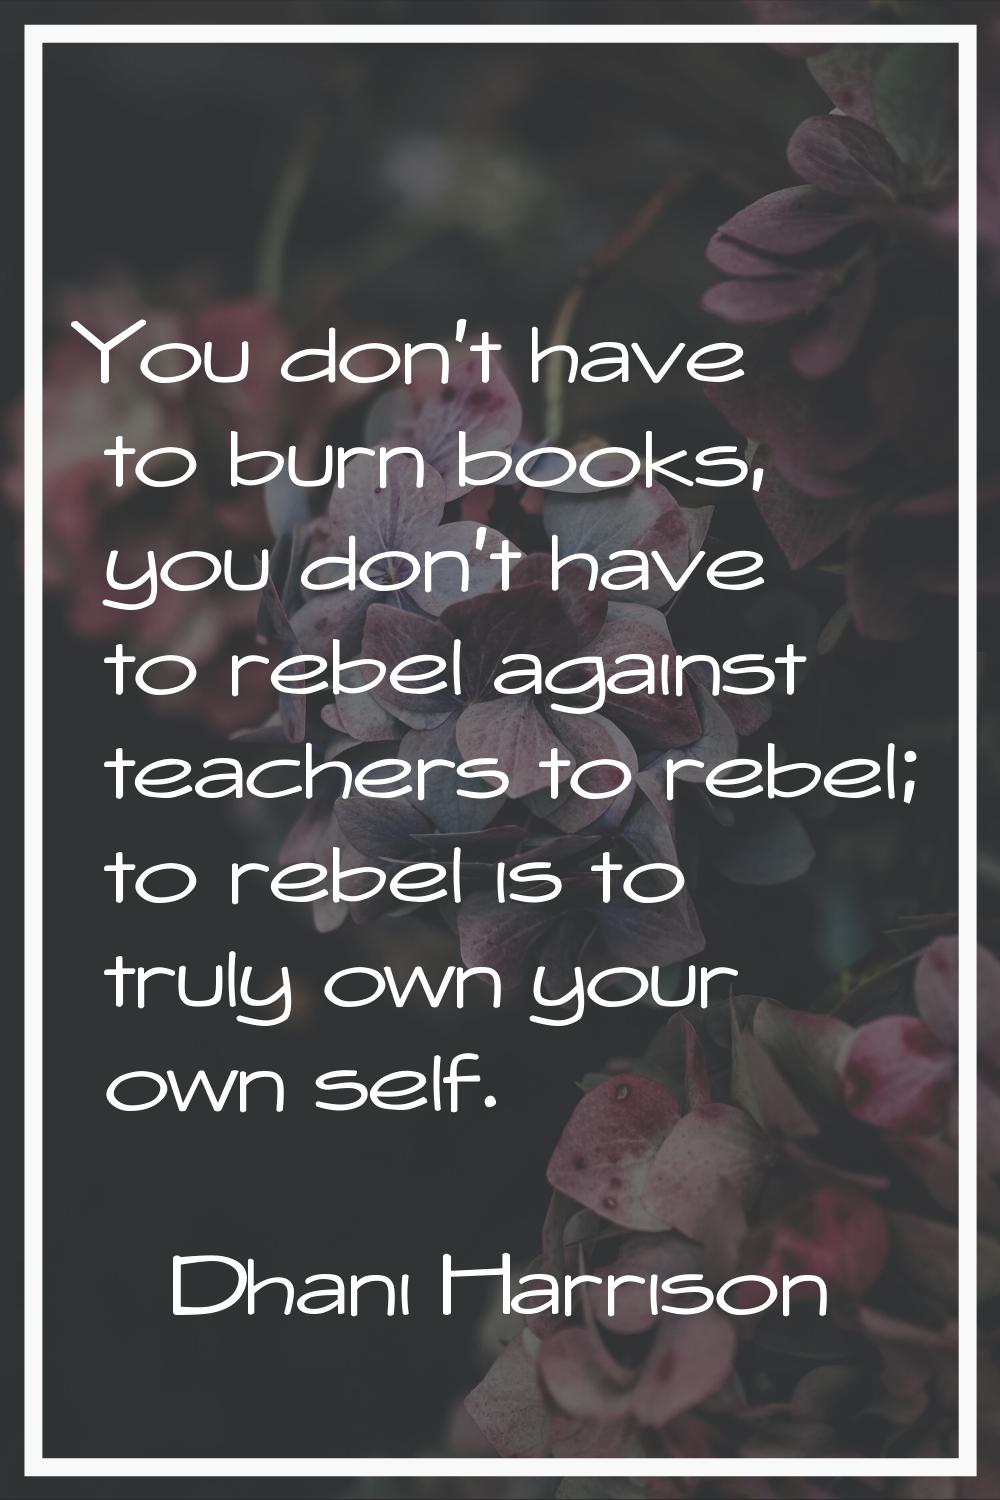 You don't have to burn books, you don't have to rebel against teachers to rebel; to rebel is to tru